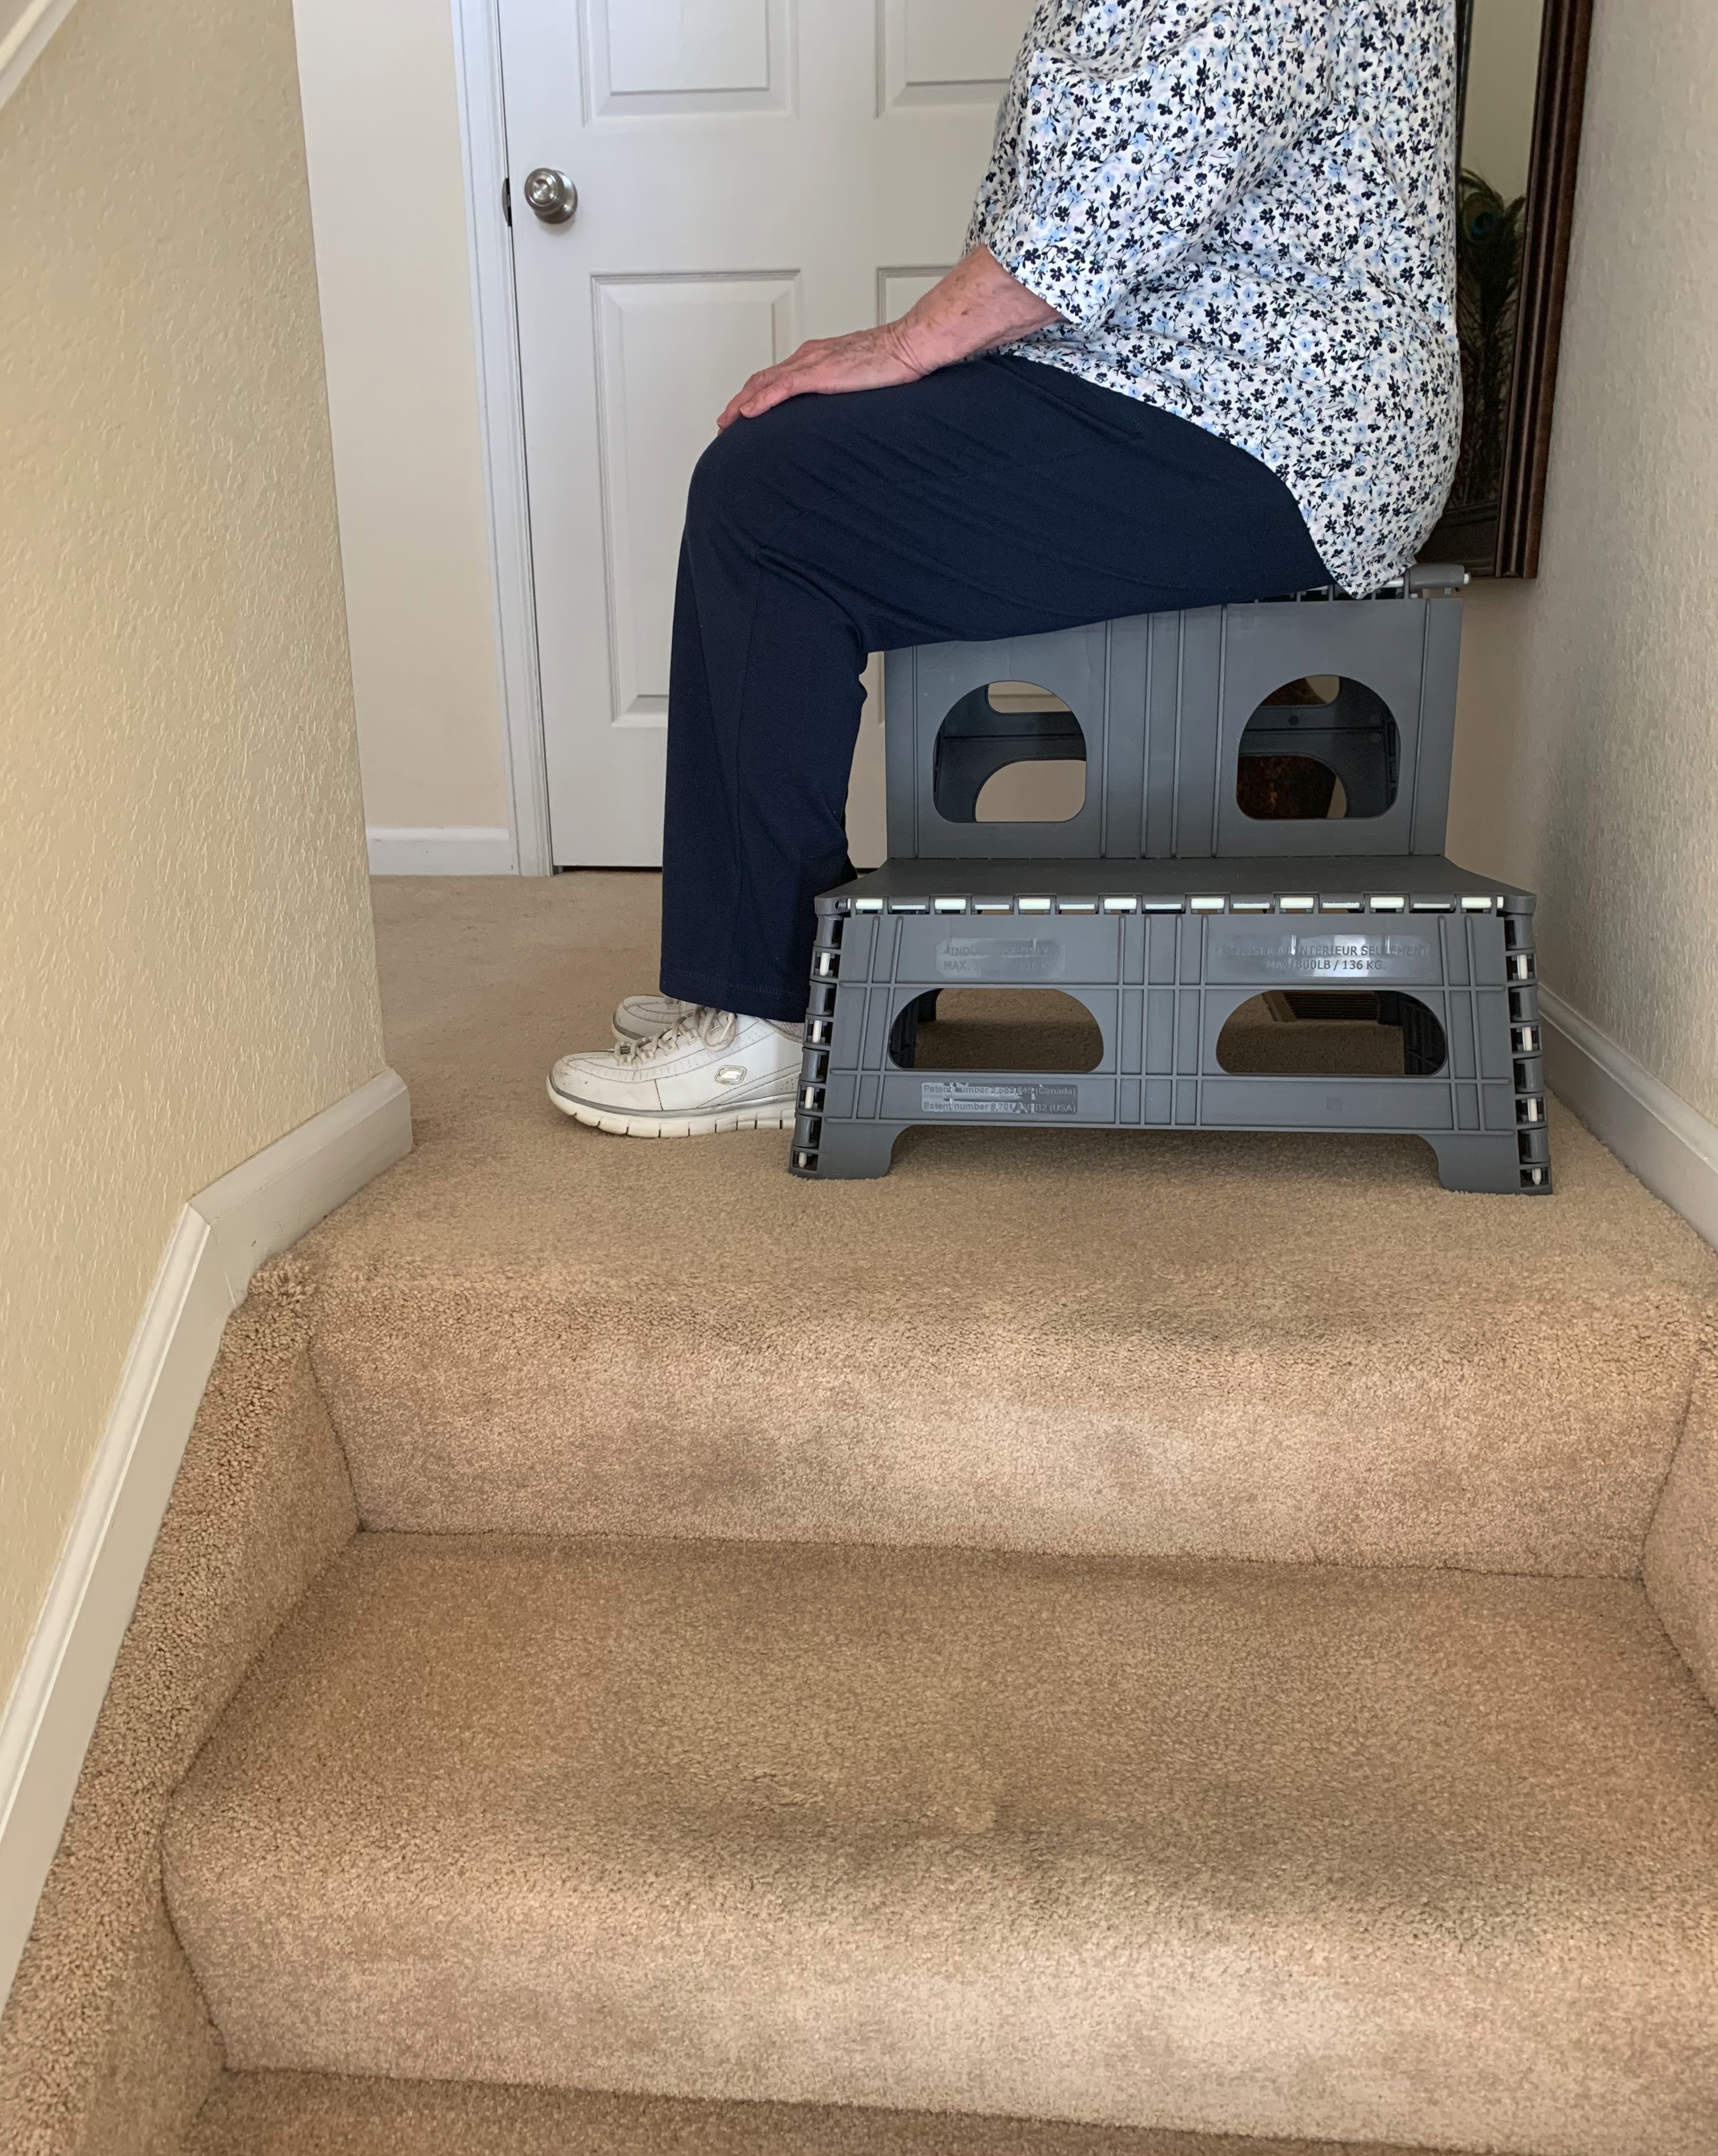 This device sits on the landing at the top of the stairs and allows you to scoot up tow more steps so that you don't have to get up from the floor but rather just stand from a seated position.